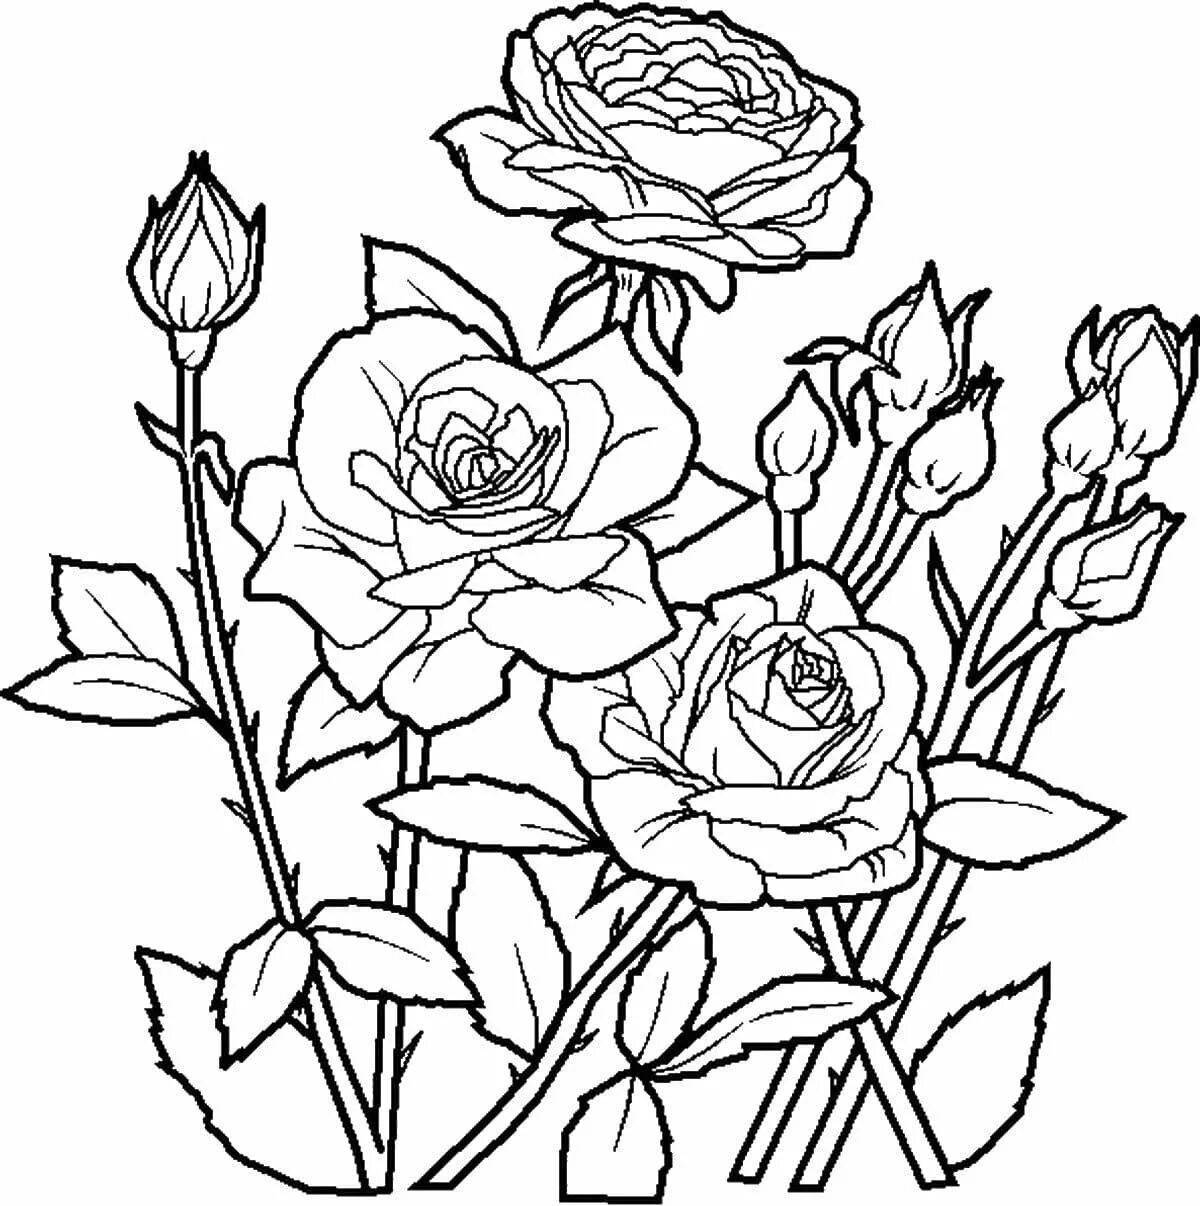 Sublime coloring flowers drawing